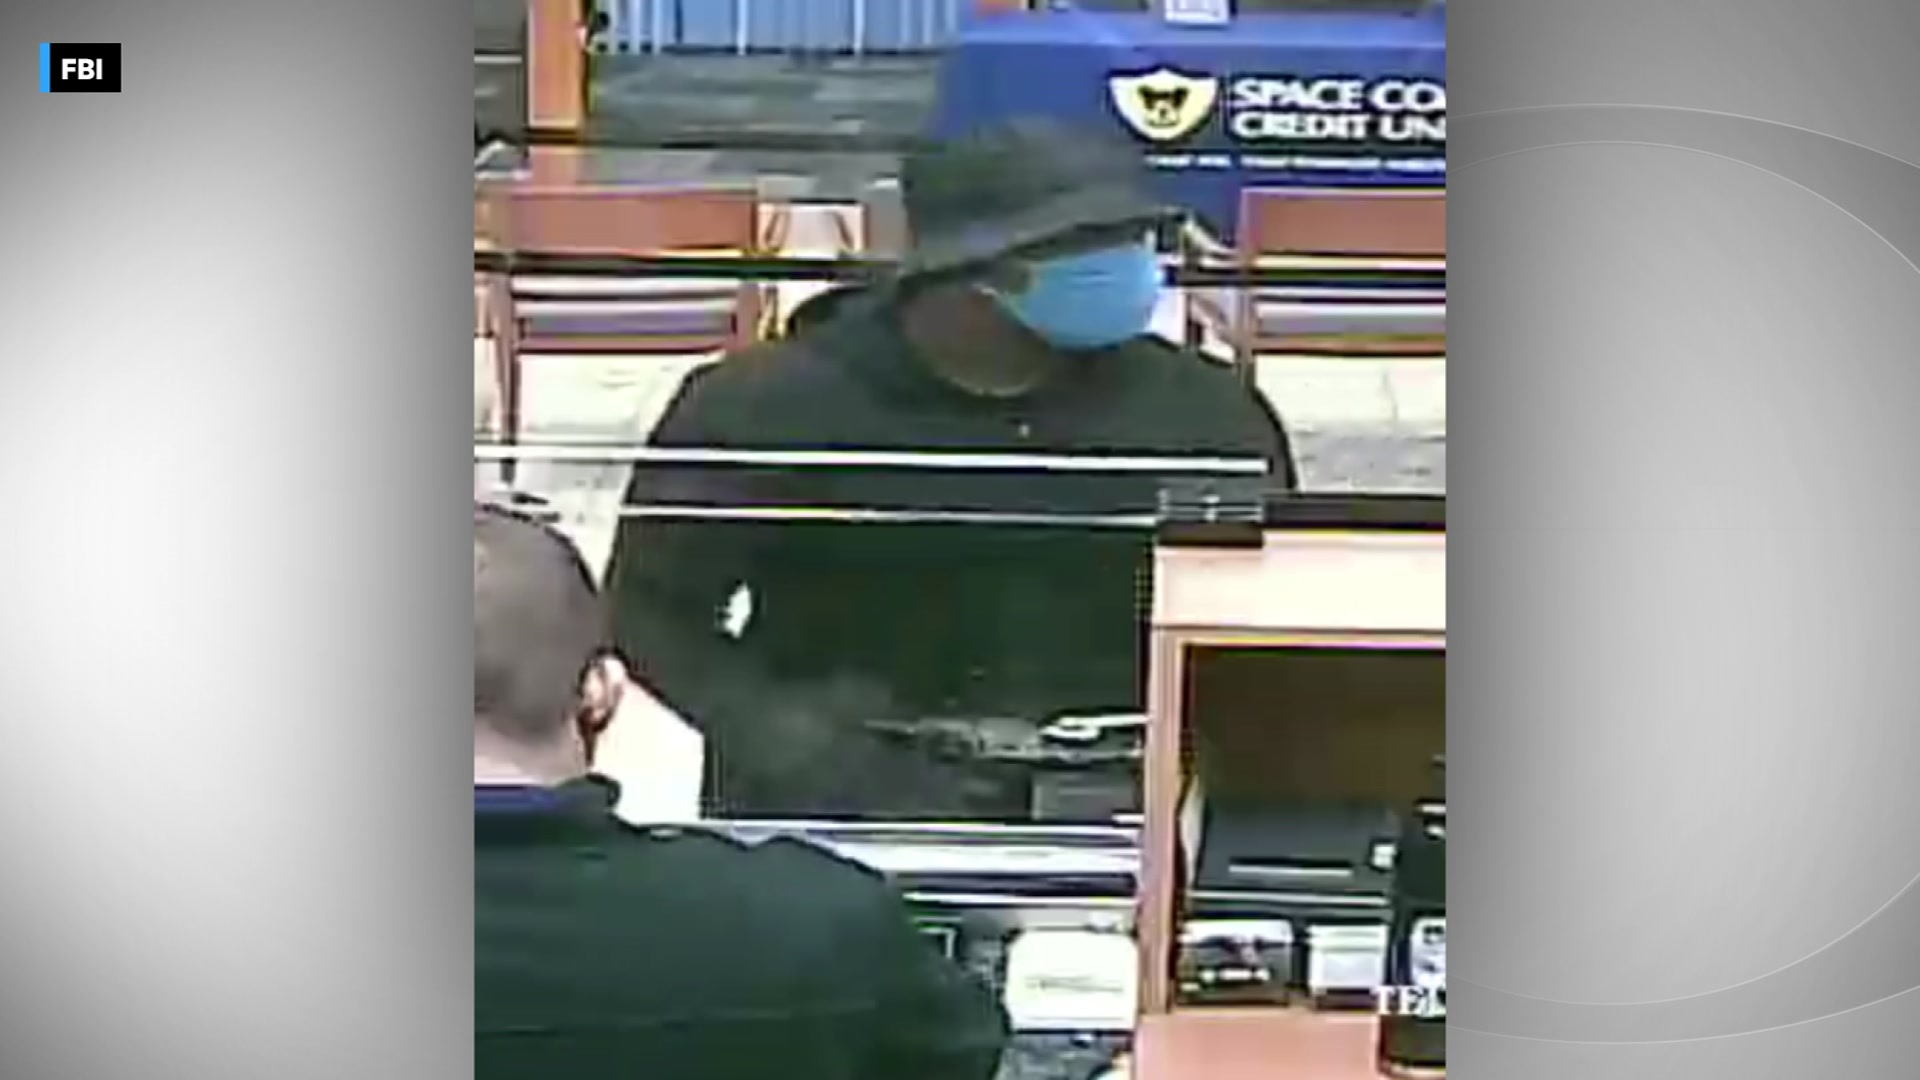 Do You Recognize This Man? FBI Releases Photos Of Miami Credit Union Robbery Suspect